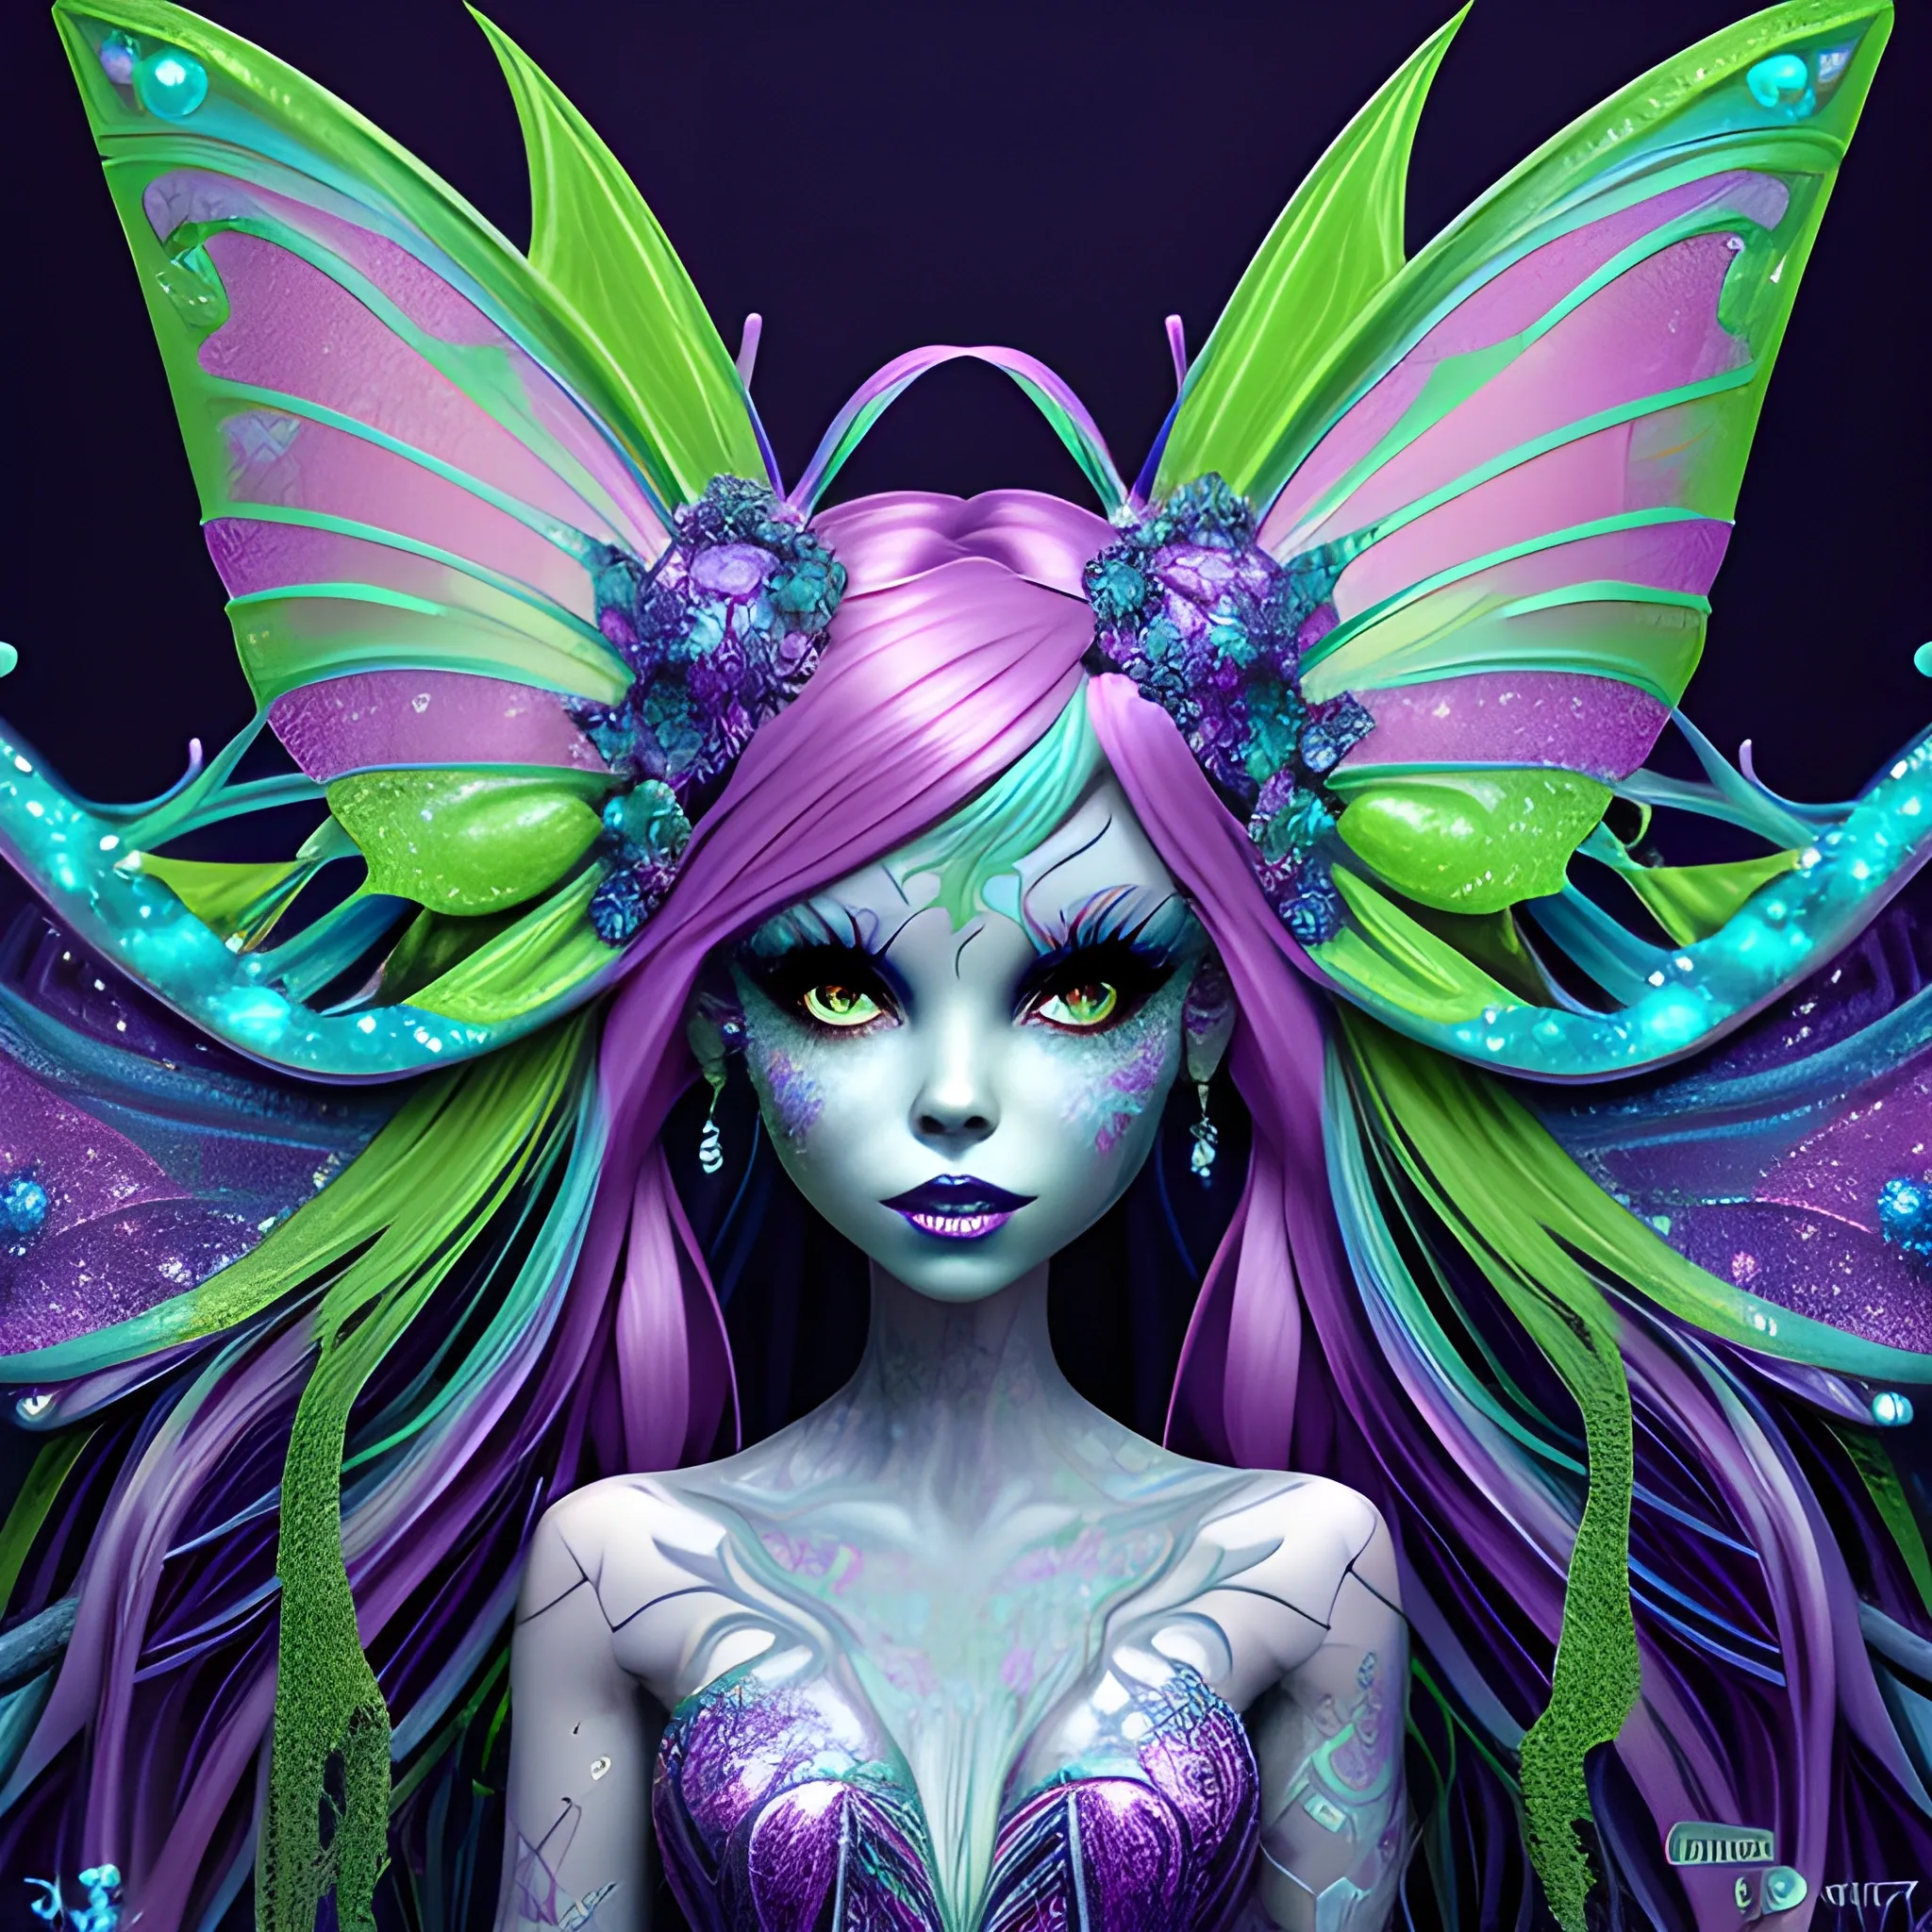  Mythical Fairy: monster High doll: vines: woman: fairy wings: forest: nature: blue and green: detailed: glitter, airbrush, luminous color sparkles; graffiti art, splash art, street art, spray paint, oil gouache melting, acrylic, high contrast, colorful polychromatic, ultra detailed, ultra quality, CGSociety, 3D